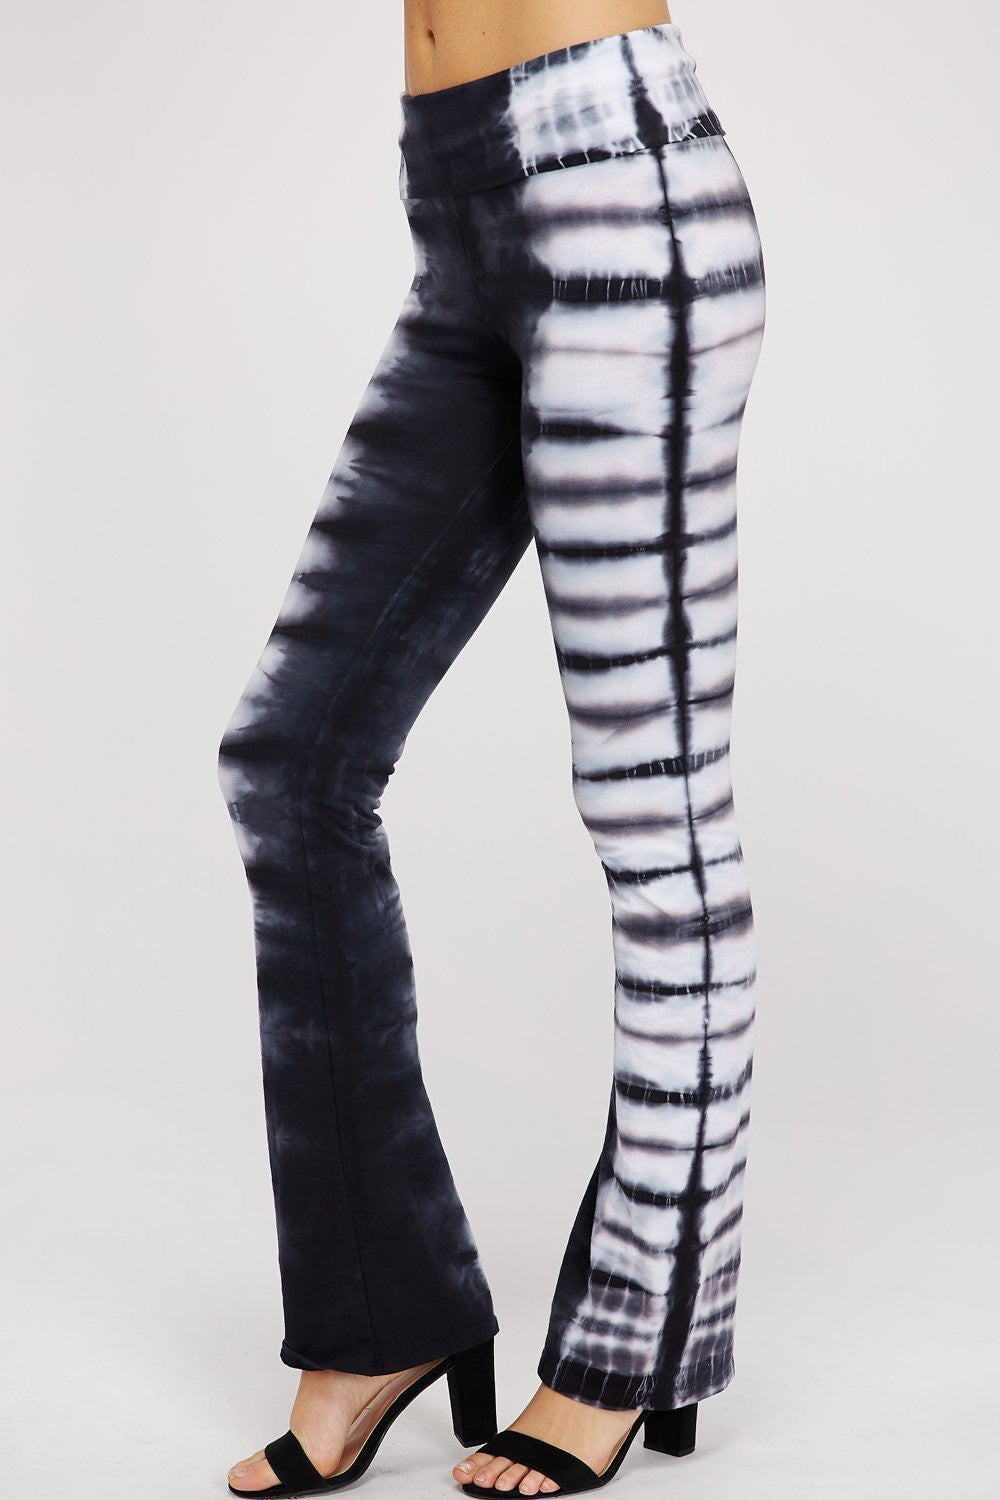 Sideways view yoga pants Black & White These yoga pants are perfect for any activity.